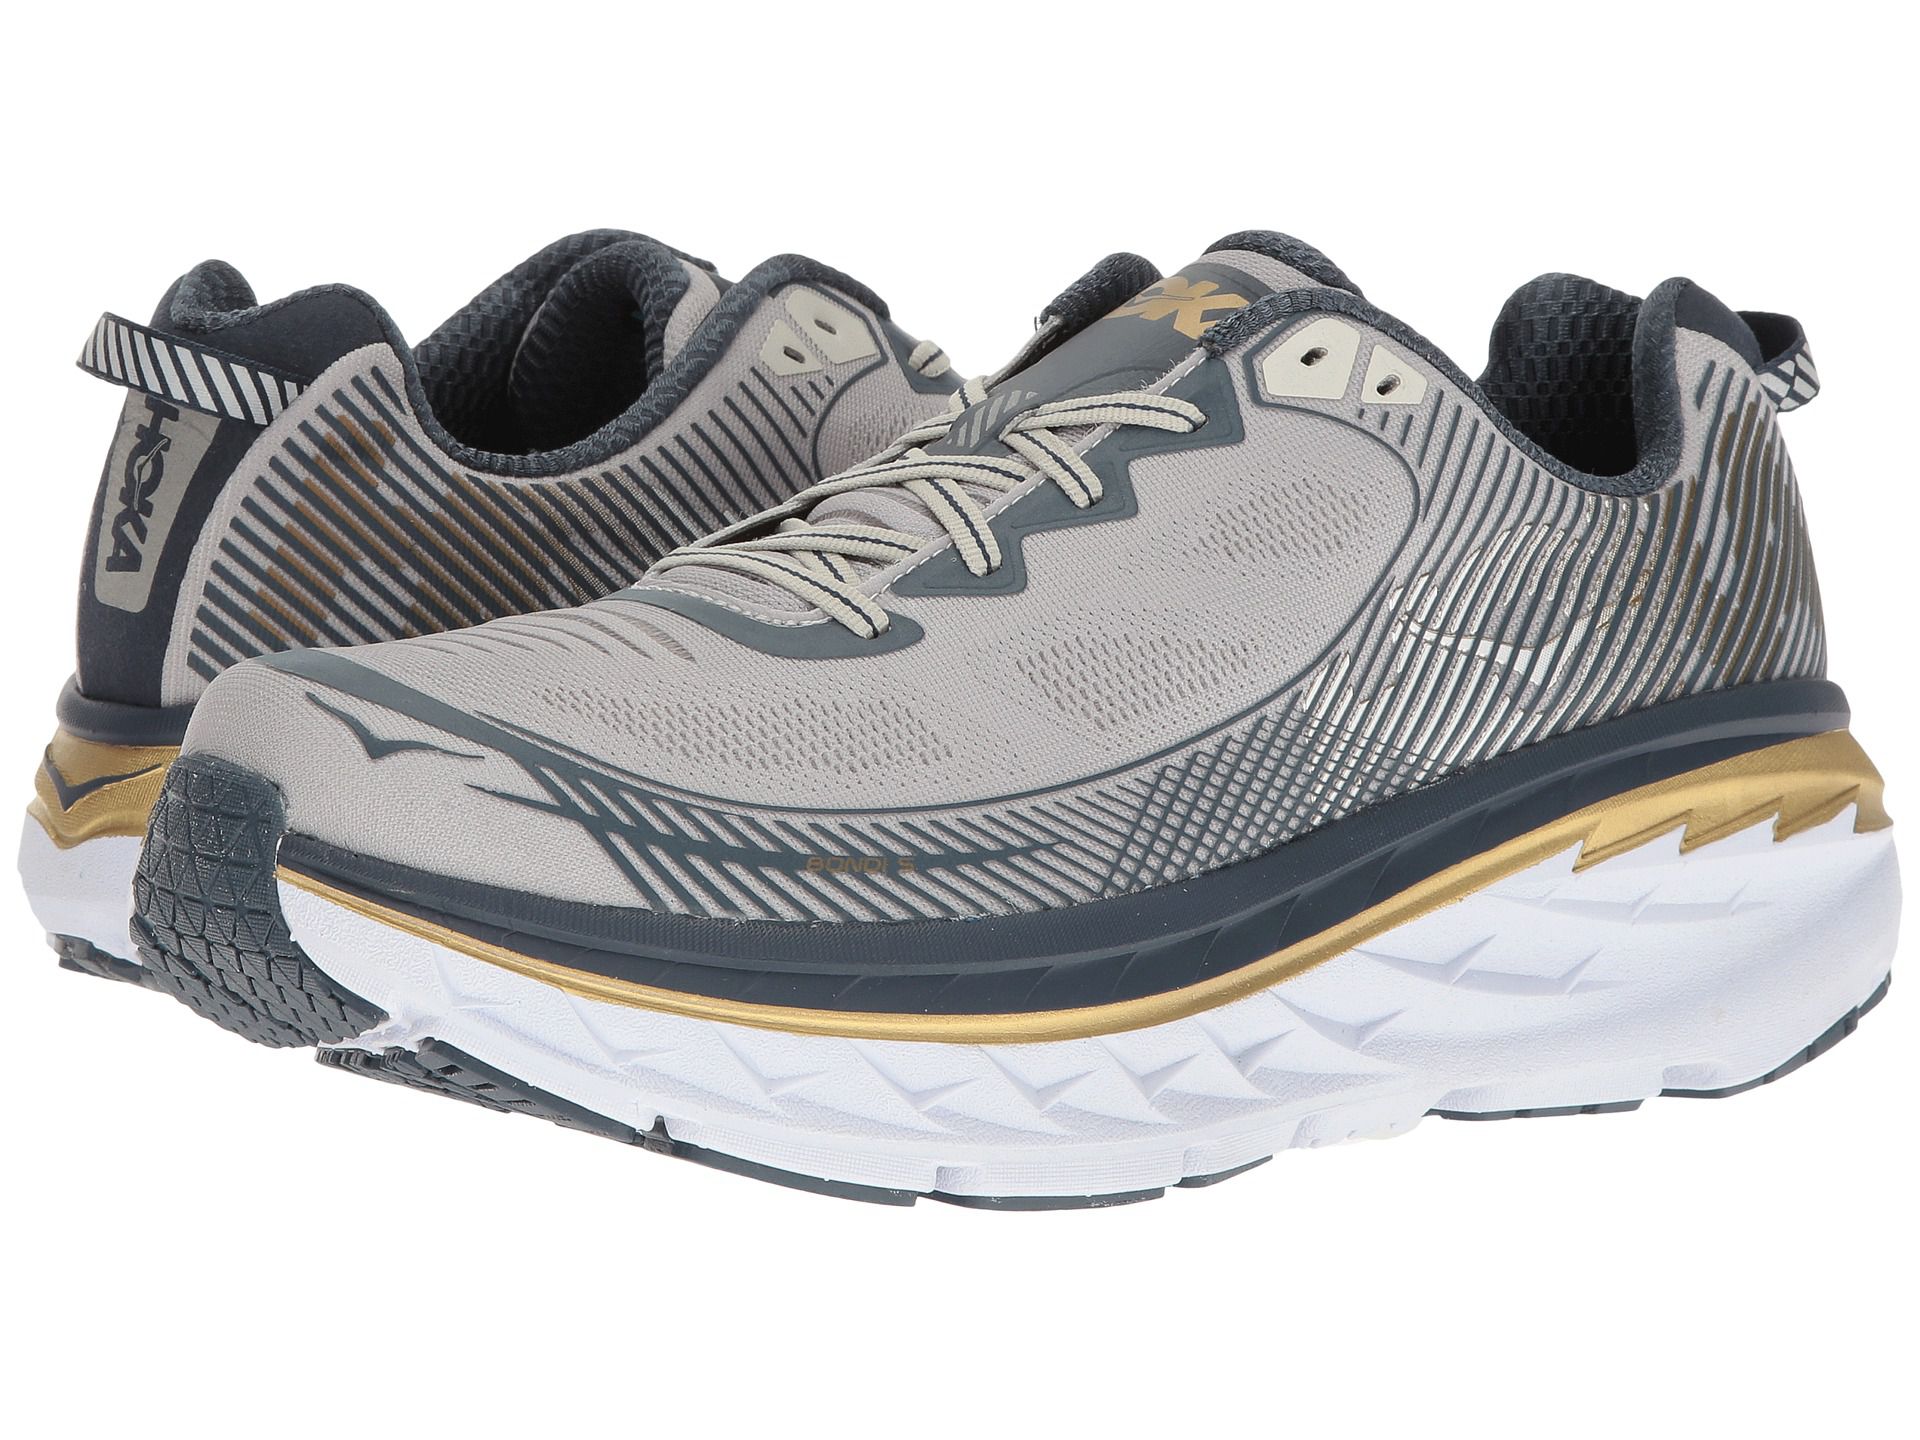 Shoes Stores Near Me: Which Running Shoes To Buy